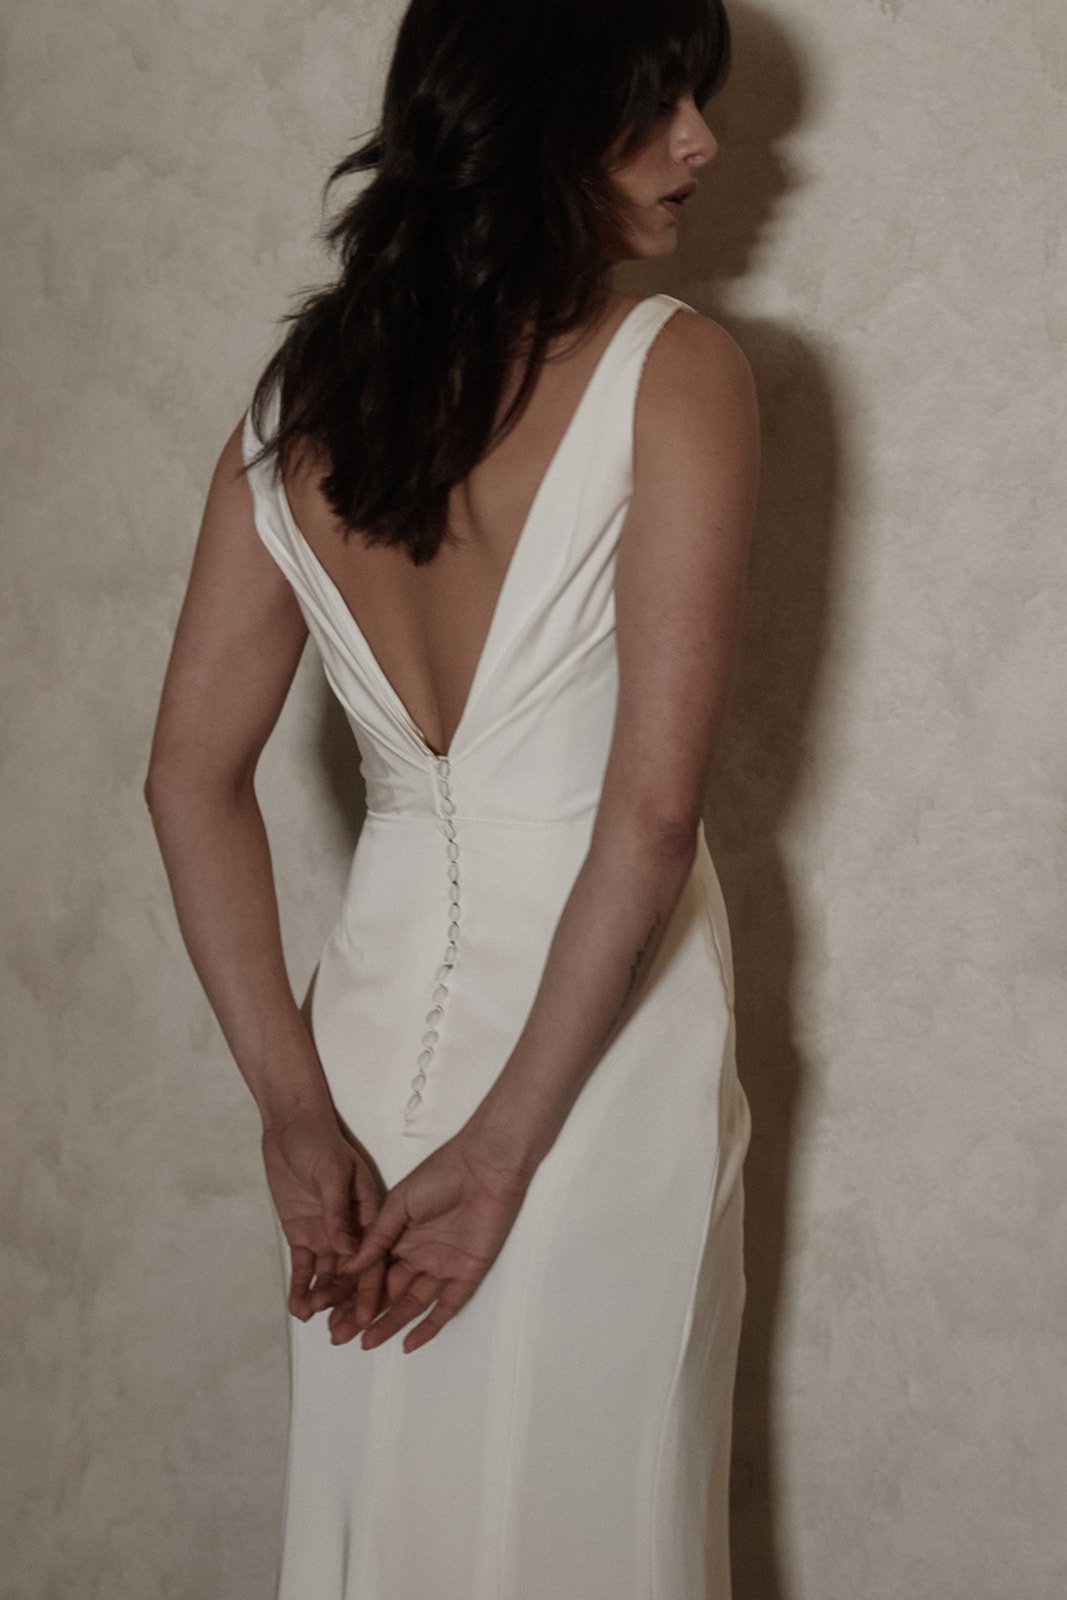 Australian wedding dress with low back and buttons in crepe.jpg